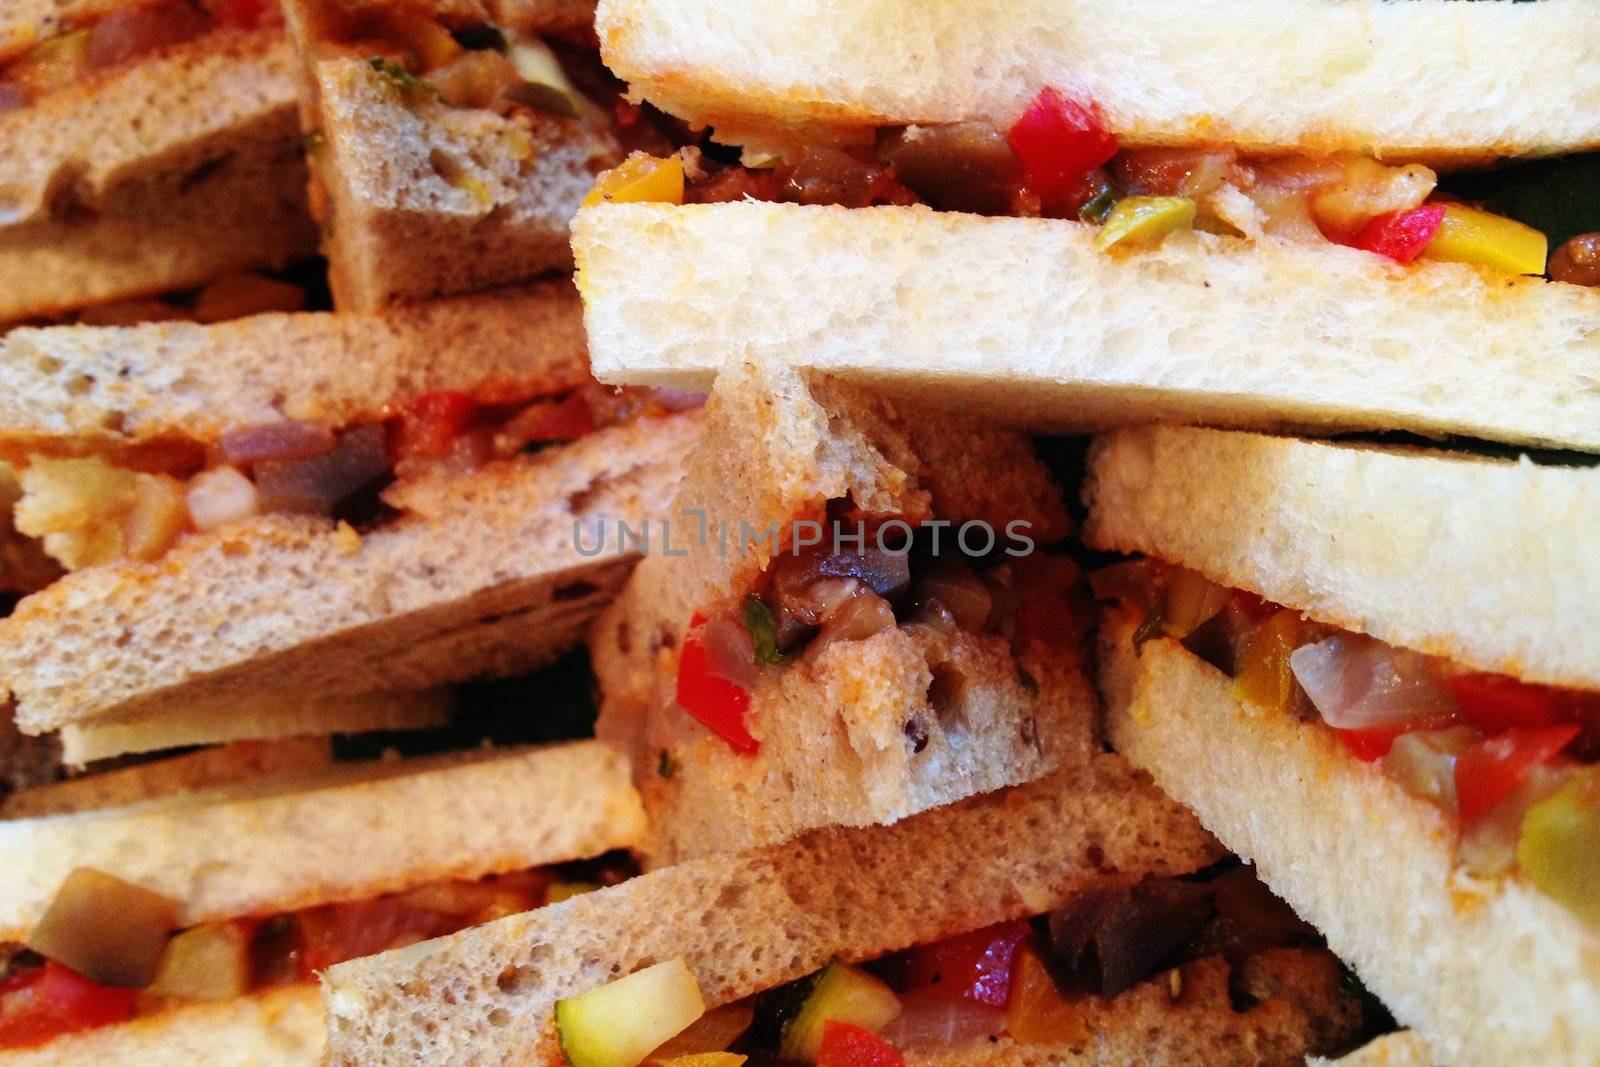 Grilled vegetable finger sandwiches by ponsulak